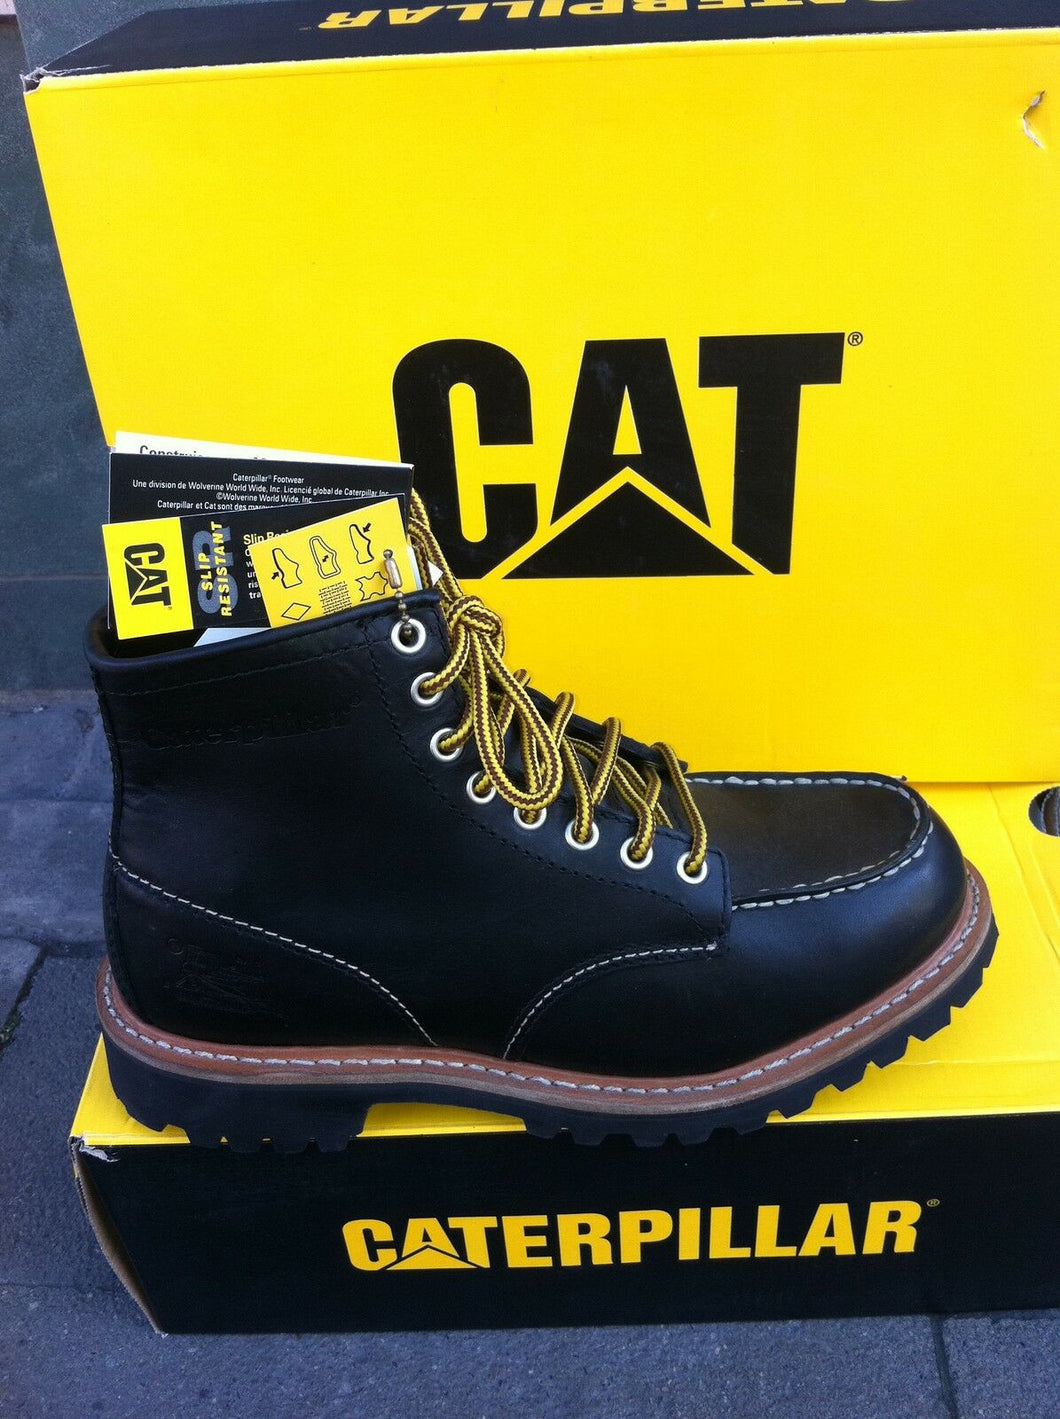 CAT Caterpillar Shoes Boots Boots Real Leather Black NEW